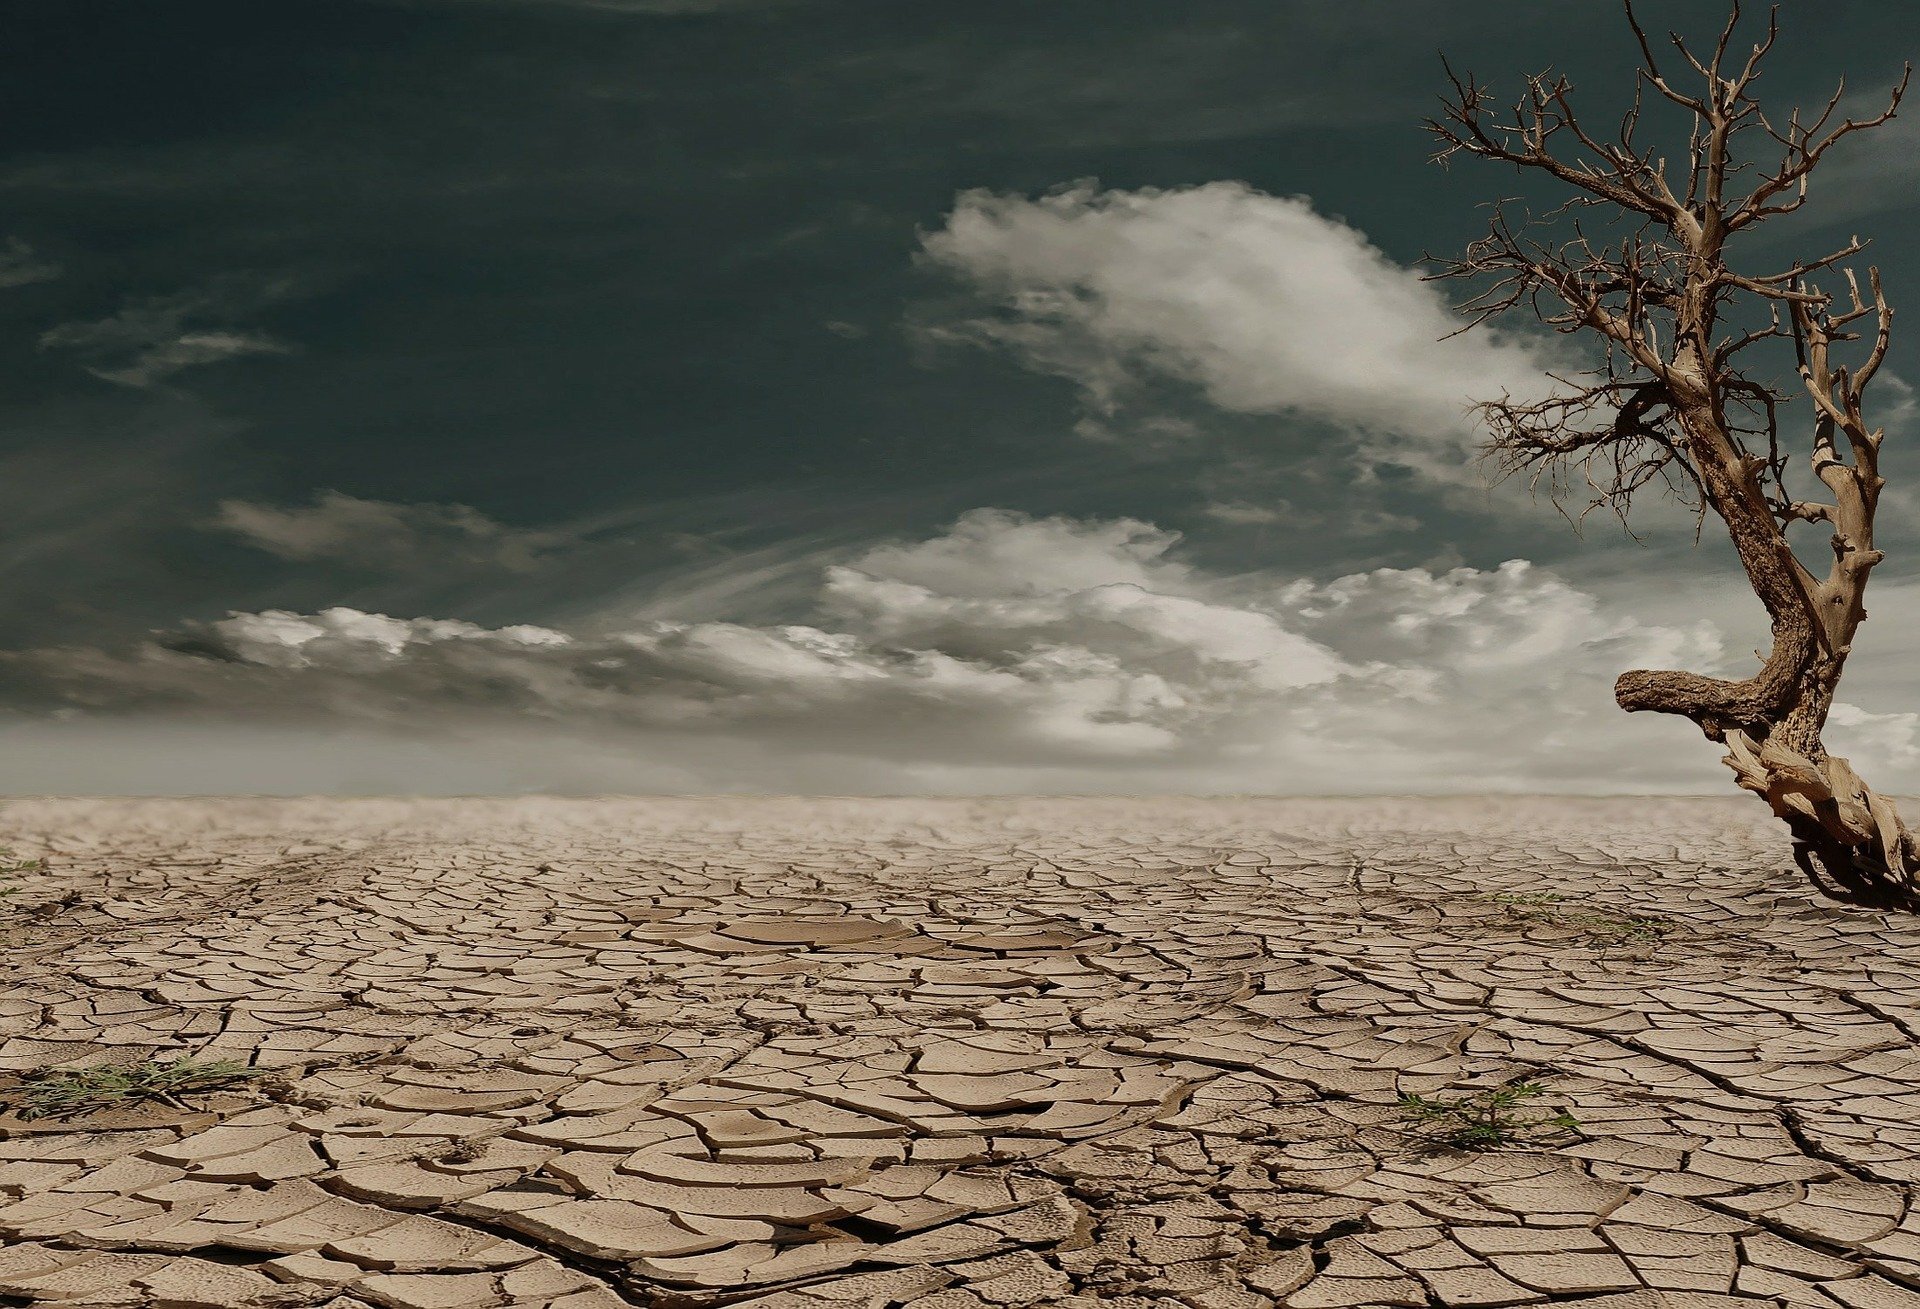 Rising global temperatures point to future widespread droughts